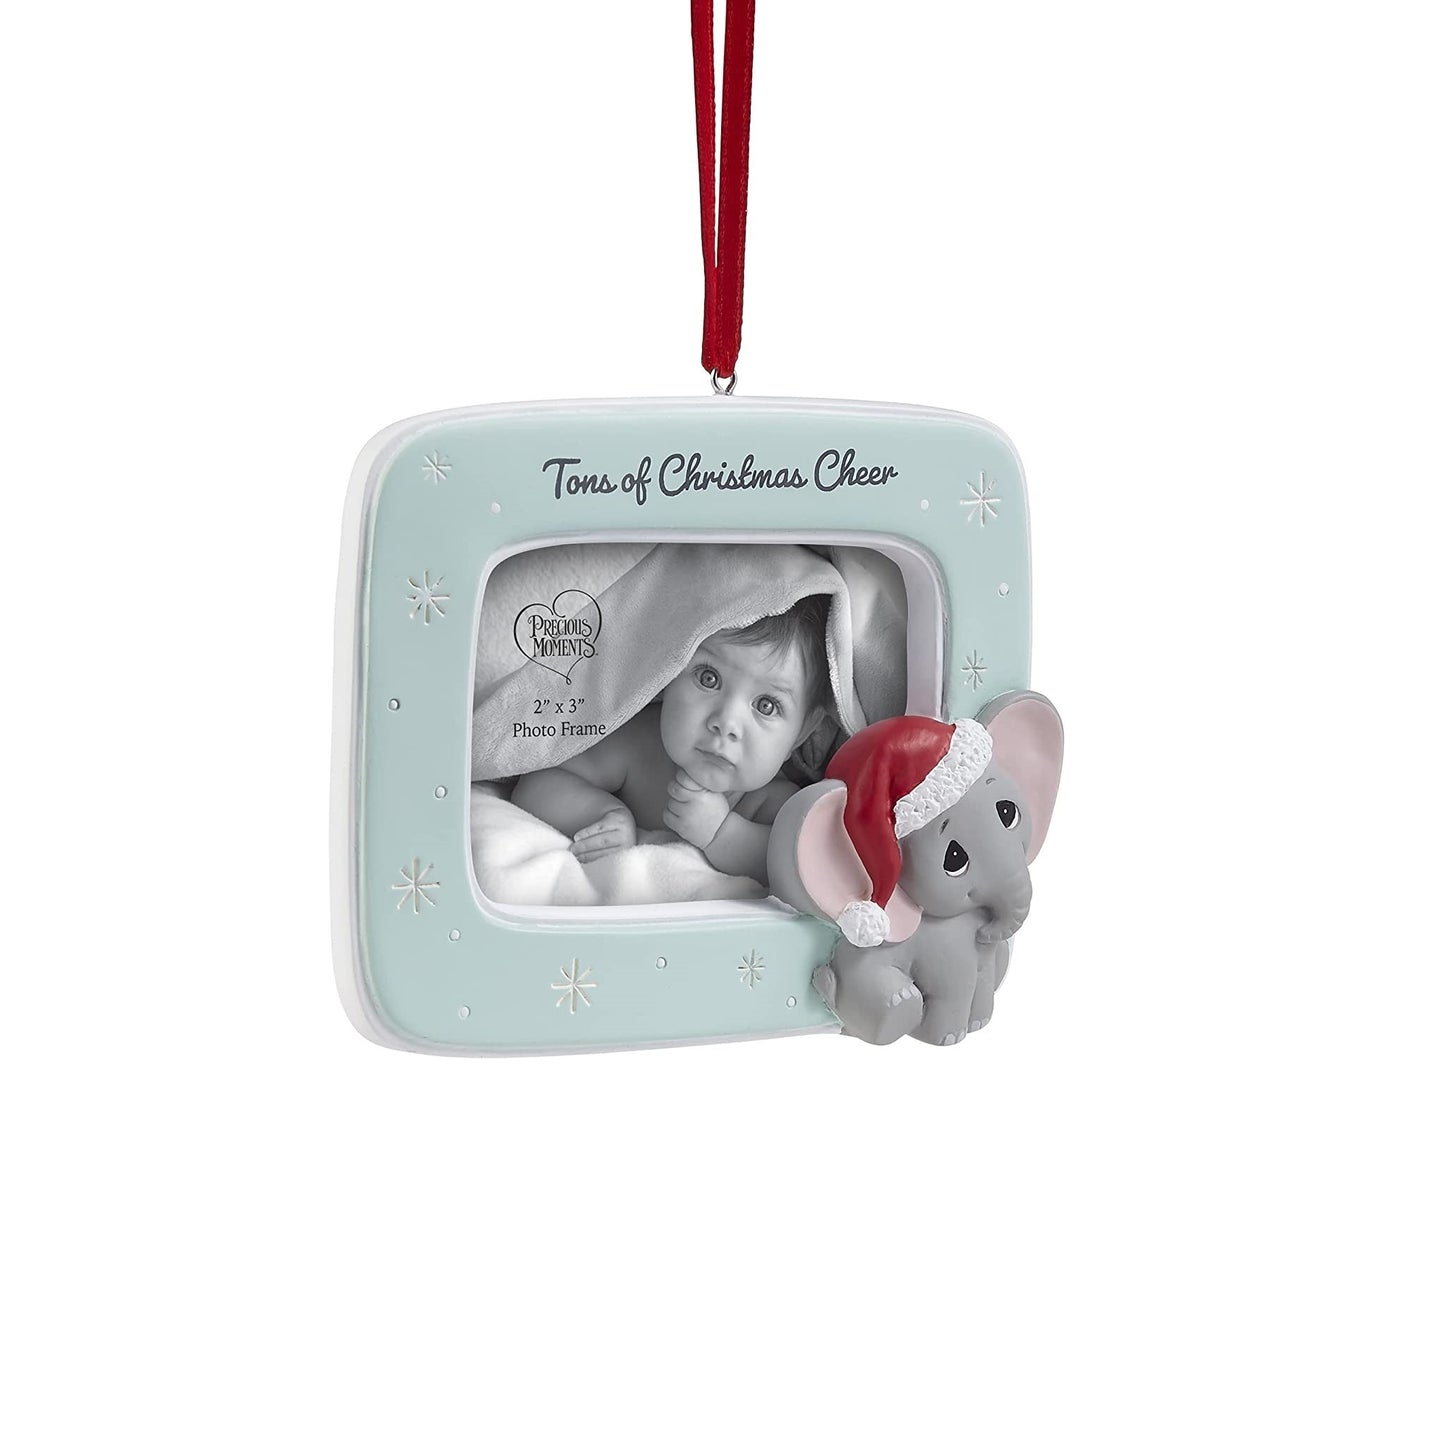 Precious Moments "Tons of Christmas Cheer" Photo Frame Ornament